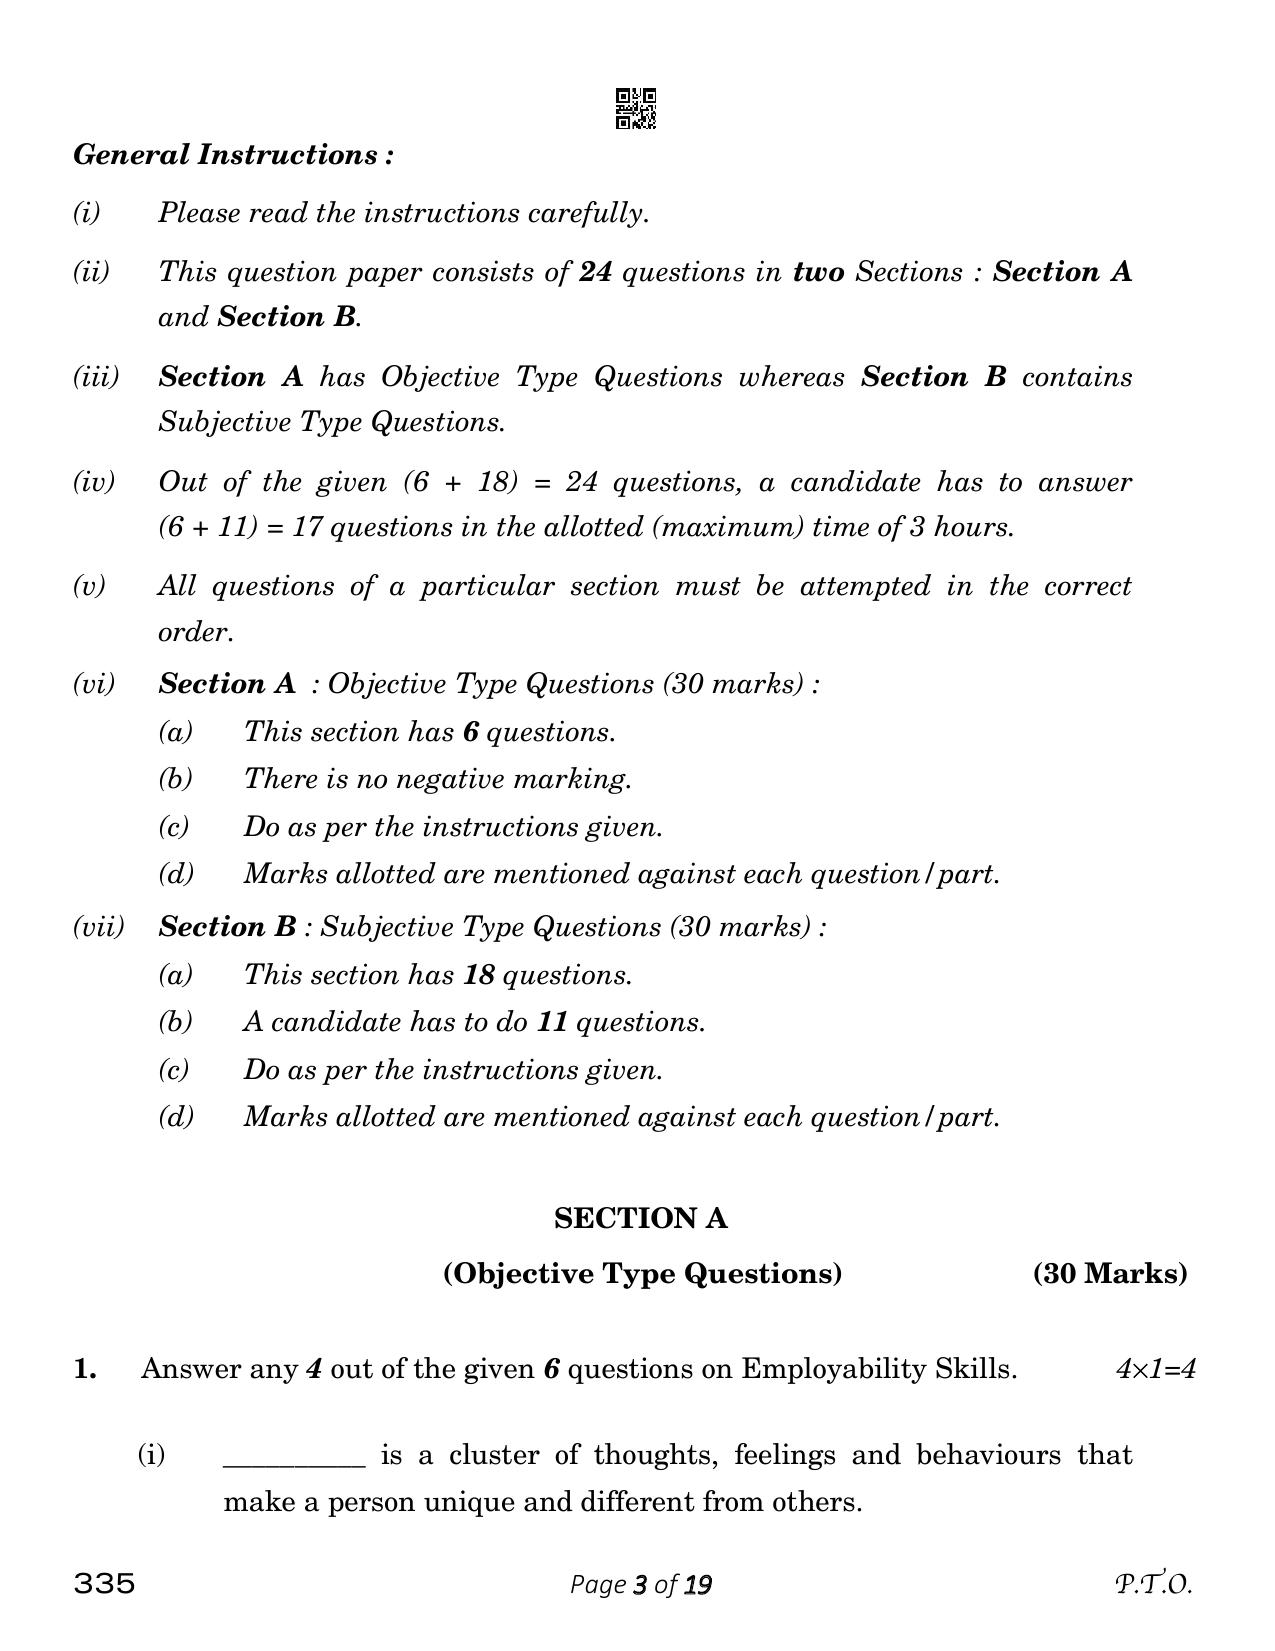 CBSE Class 12 Banking (Compartment) 2023 Question Paper - Page 3